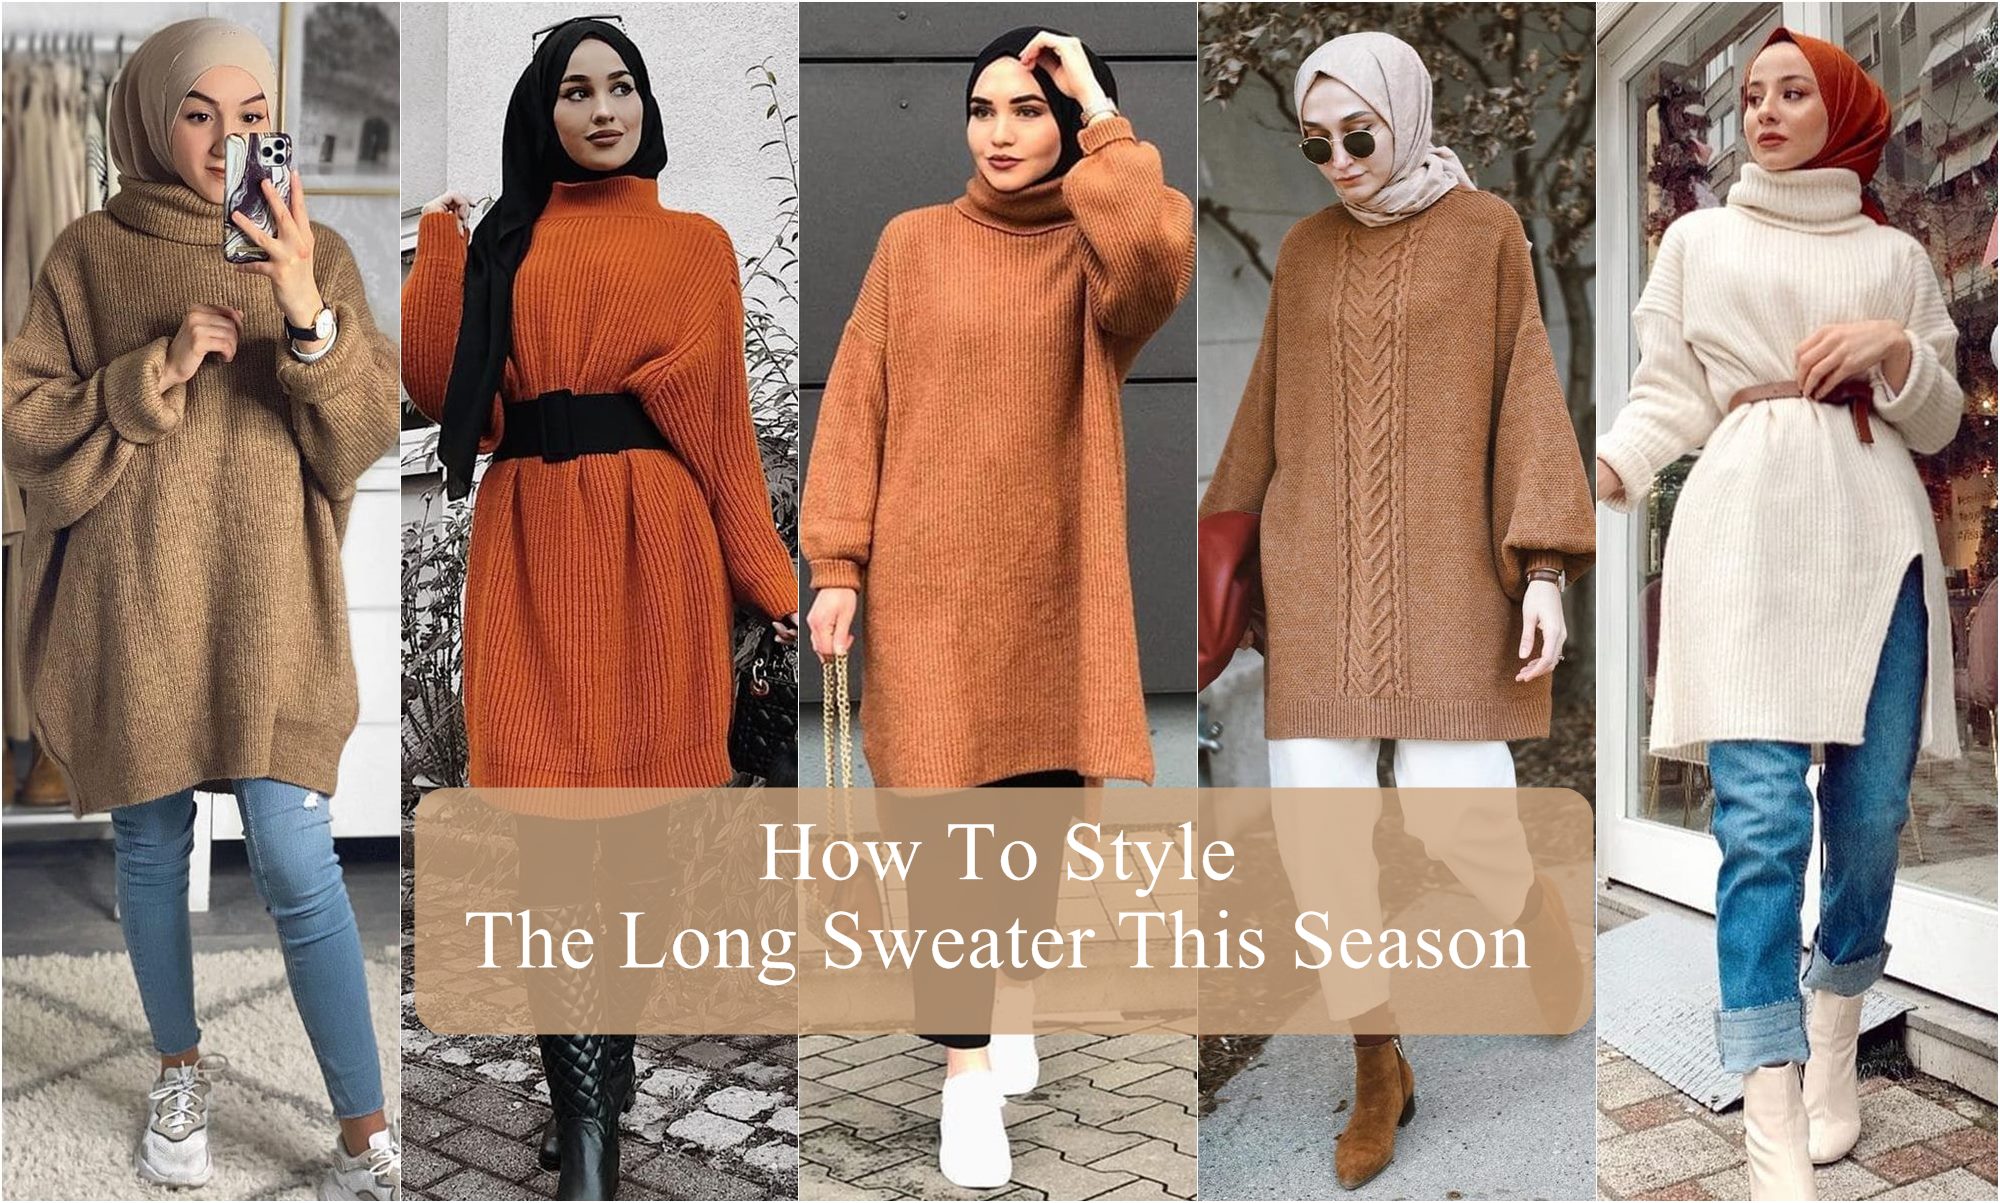 How To Style The Long Sweater This Season - Hijab Fashion Inspiration